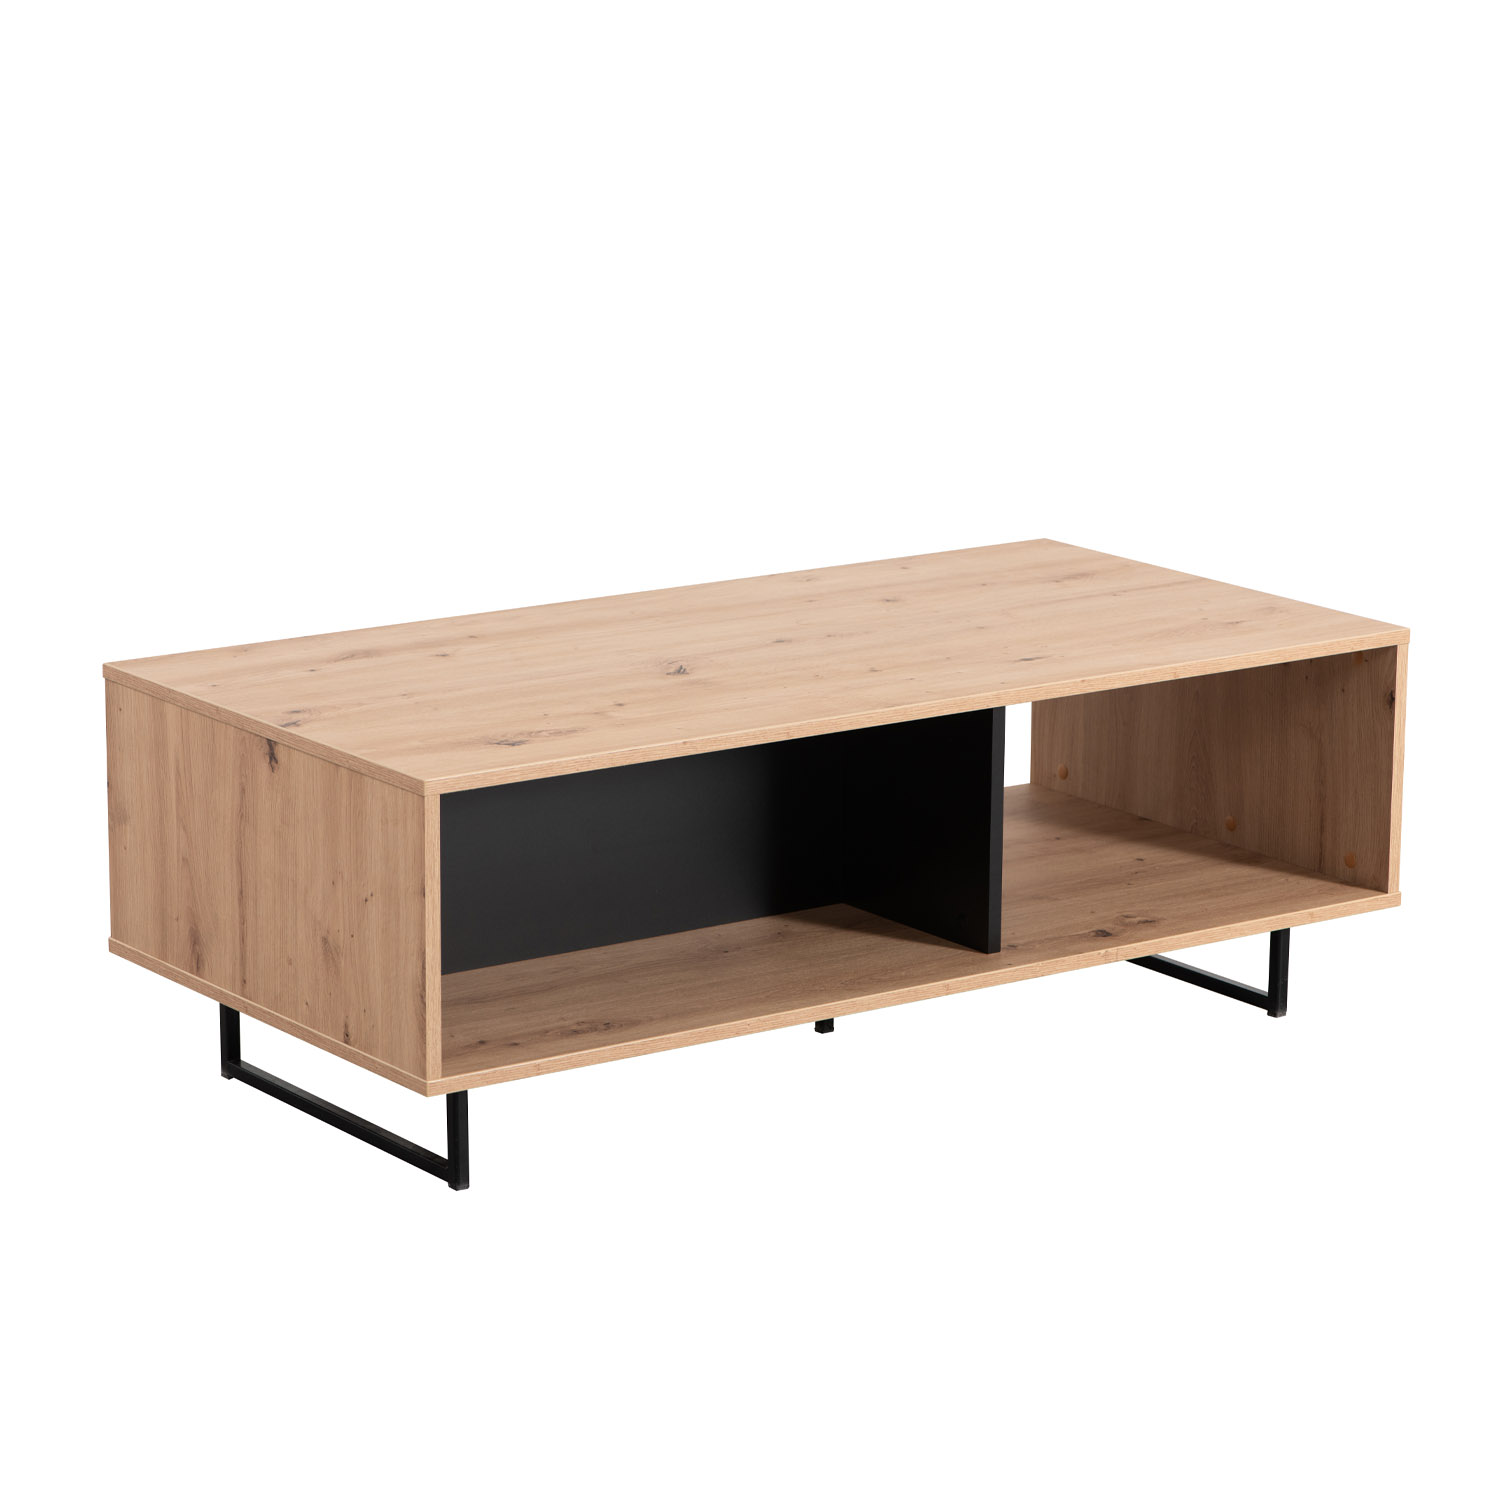 Coffee Table Living Room Table Wooden Table Oak Industrial Style Storage